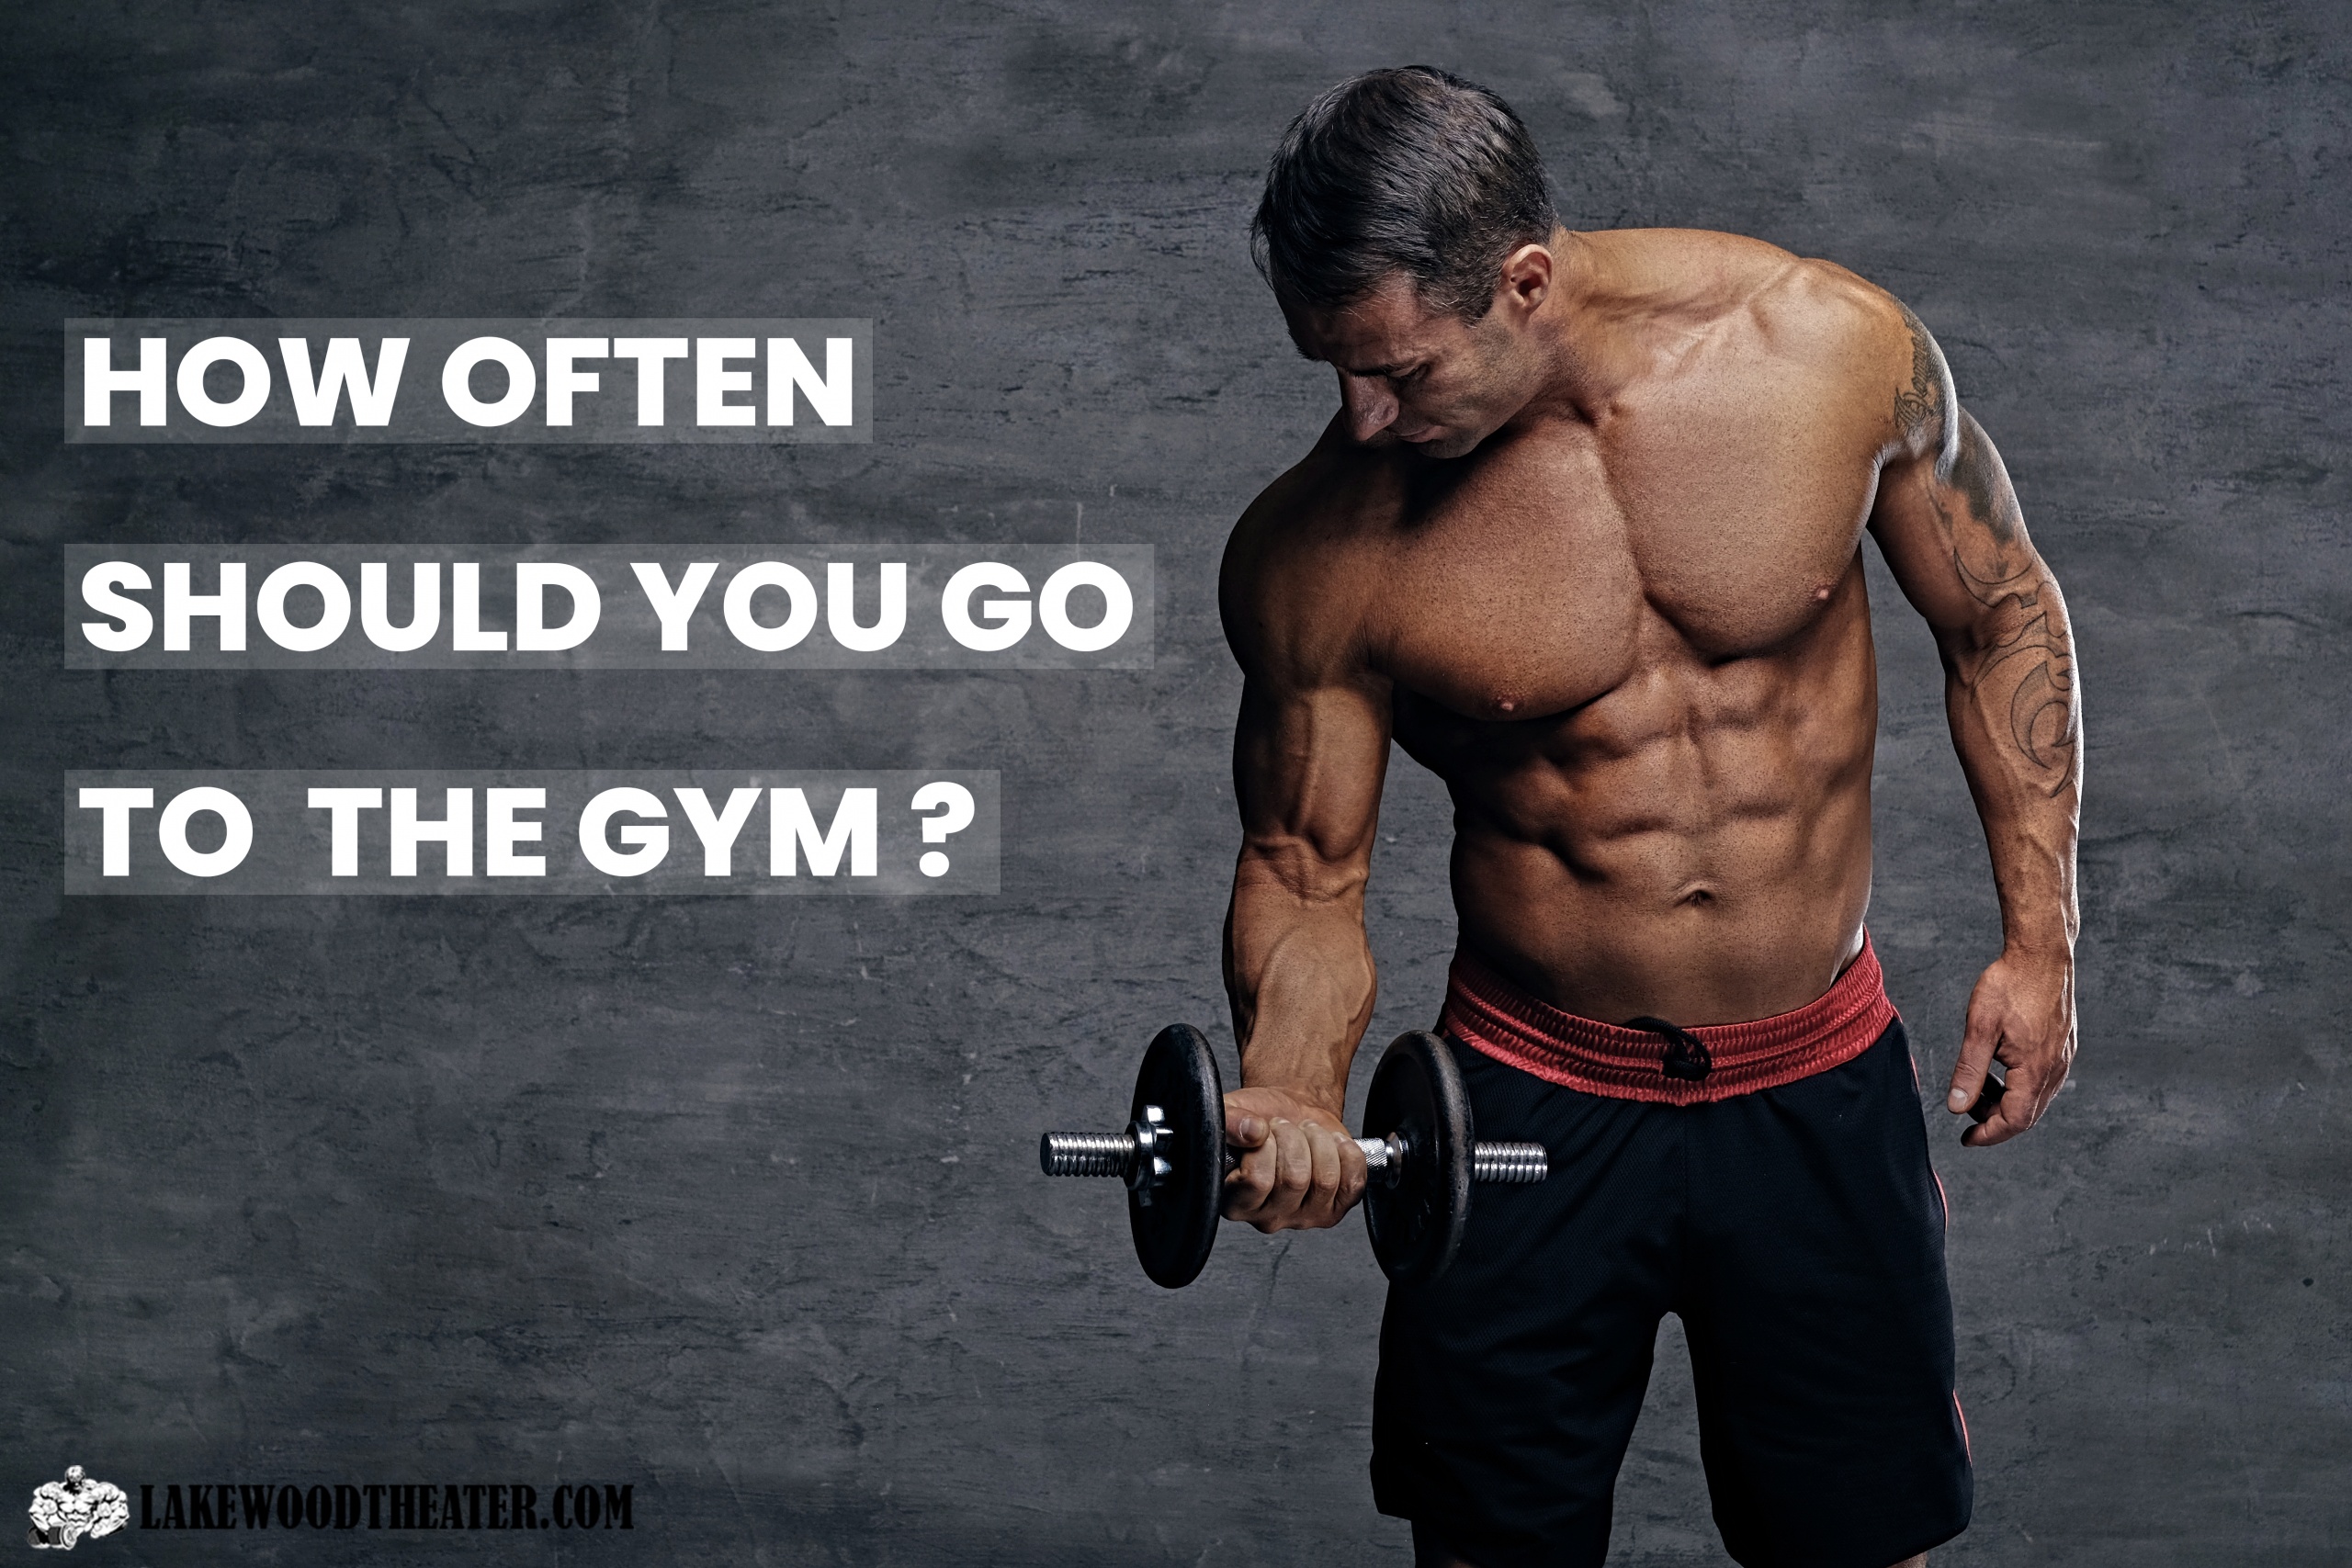 How often should you go to the gym?